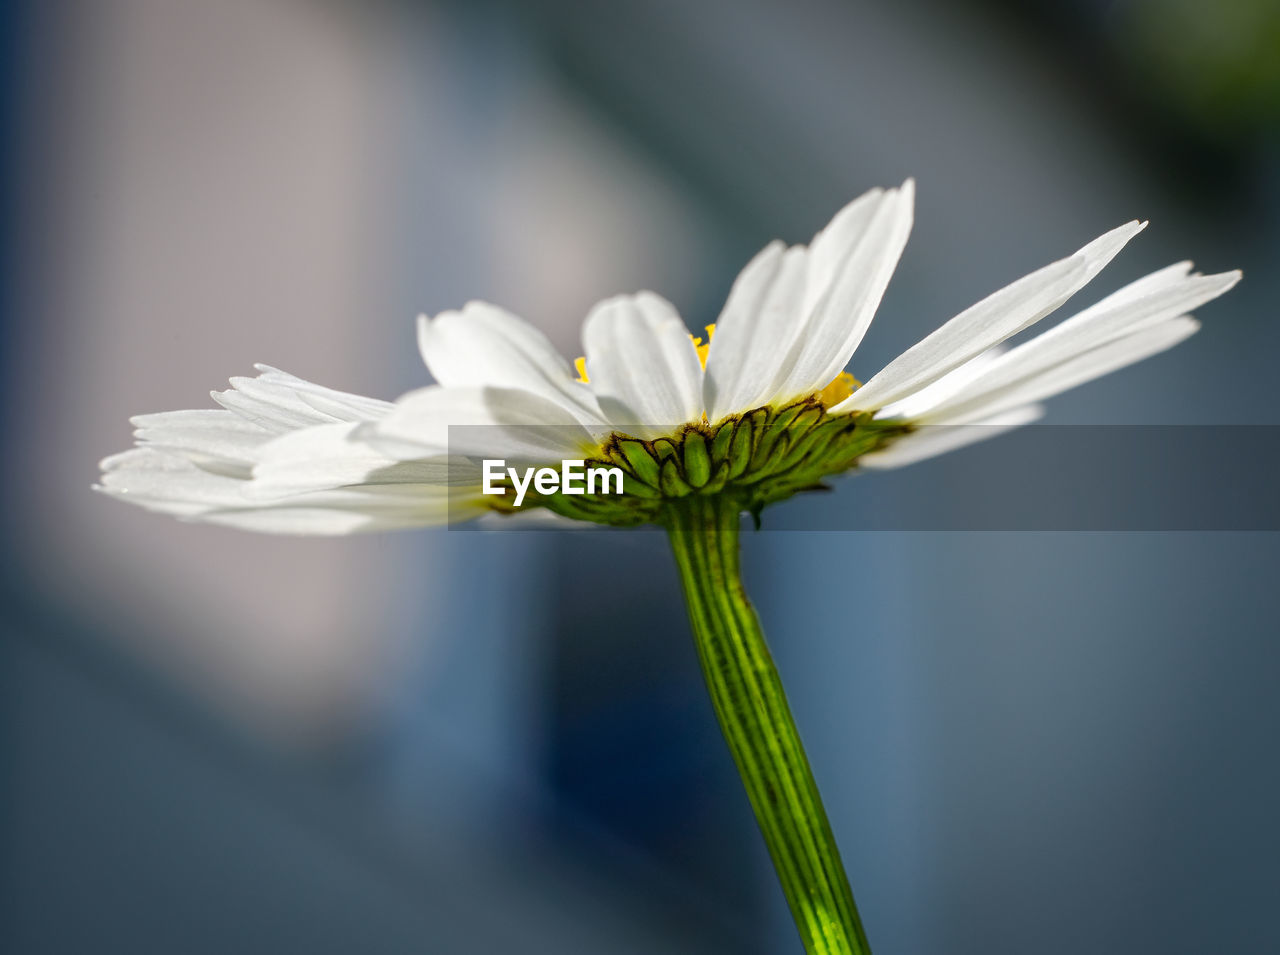 CLOSE-UP OF WHITE FLOWER AGAINST BLURRED BACKGROUND